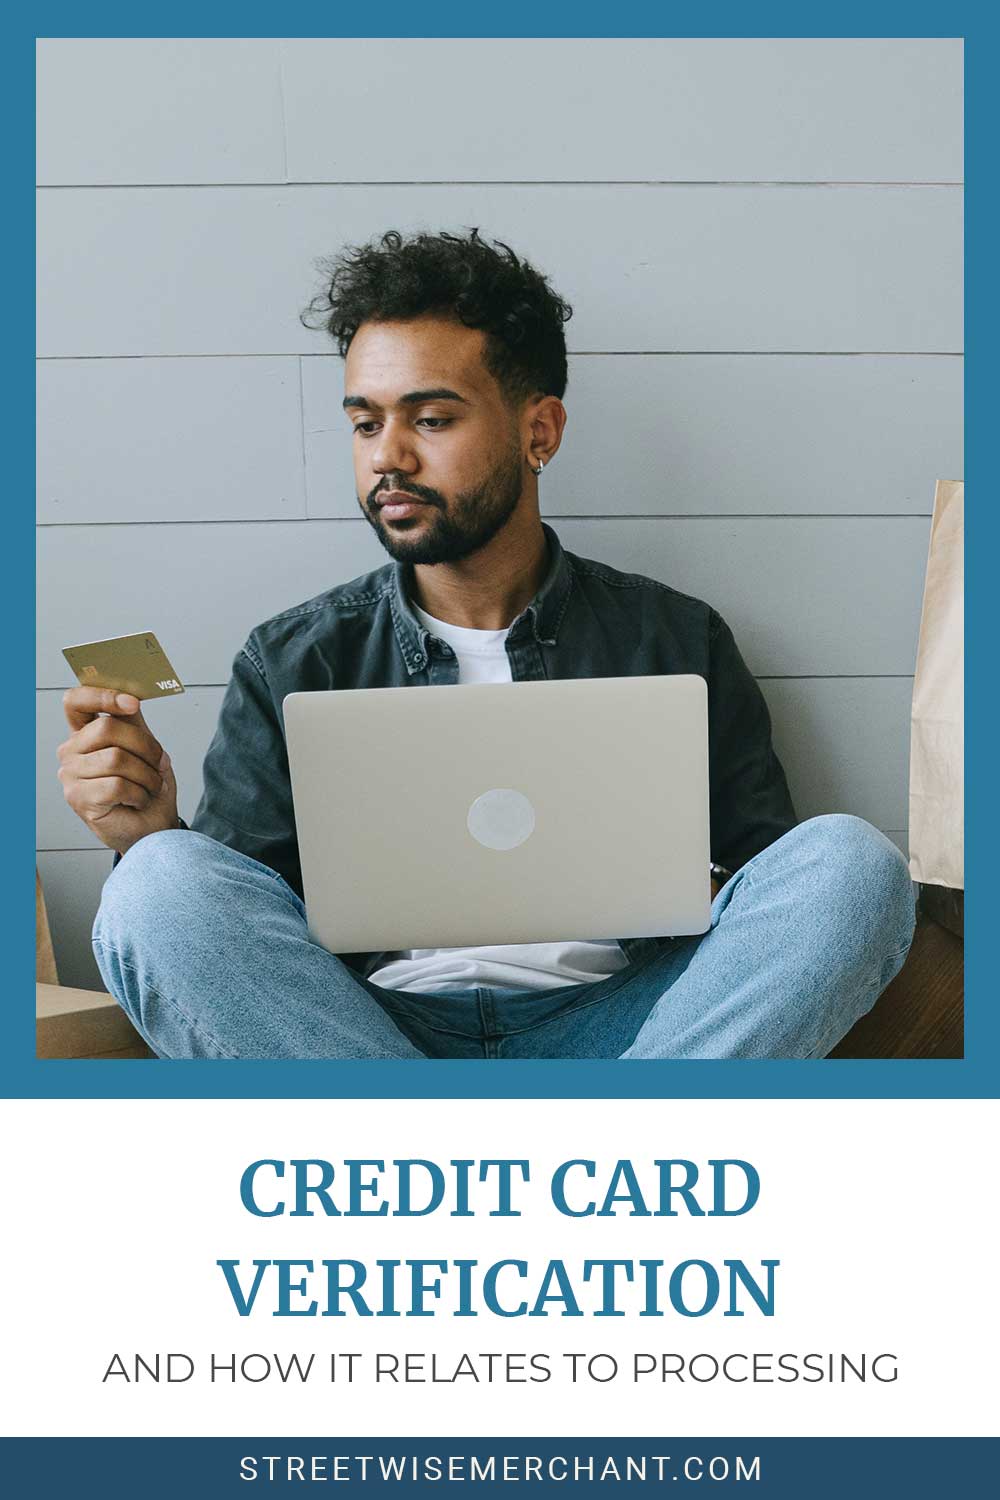 A man sitting on floor ,looking at a credit card and a laptop on his lap - Credit Card Verification and How it Relates to Processing.